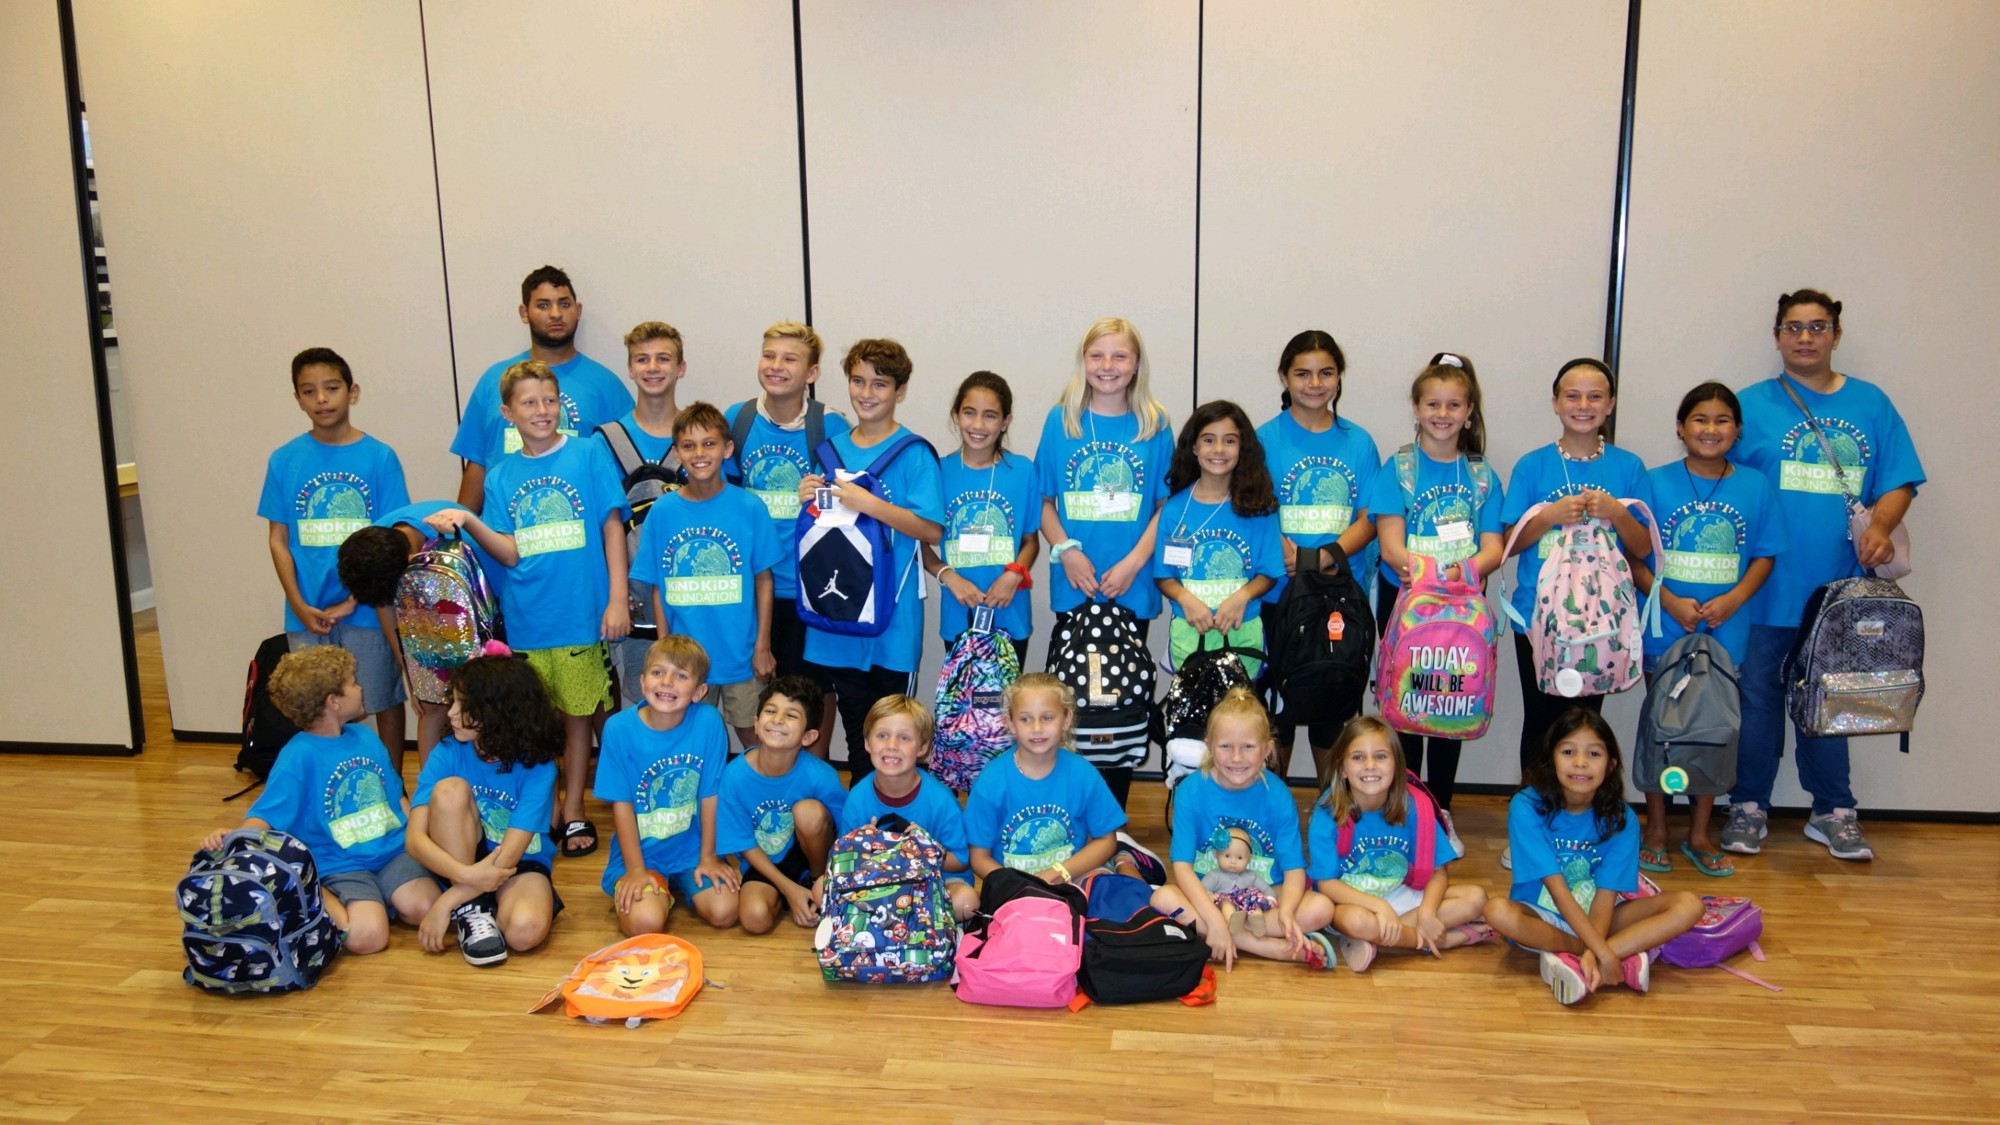 More than 20 children in the Kind Kids Foundation gathered on Thursday, Aug. 1, to pack backpacks with school supplies for children at SunRidge Elementary.